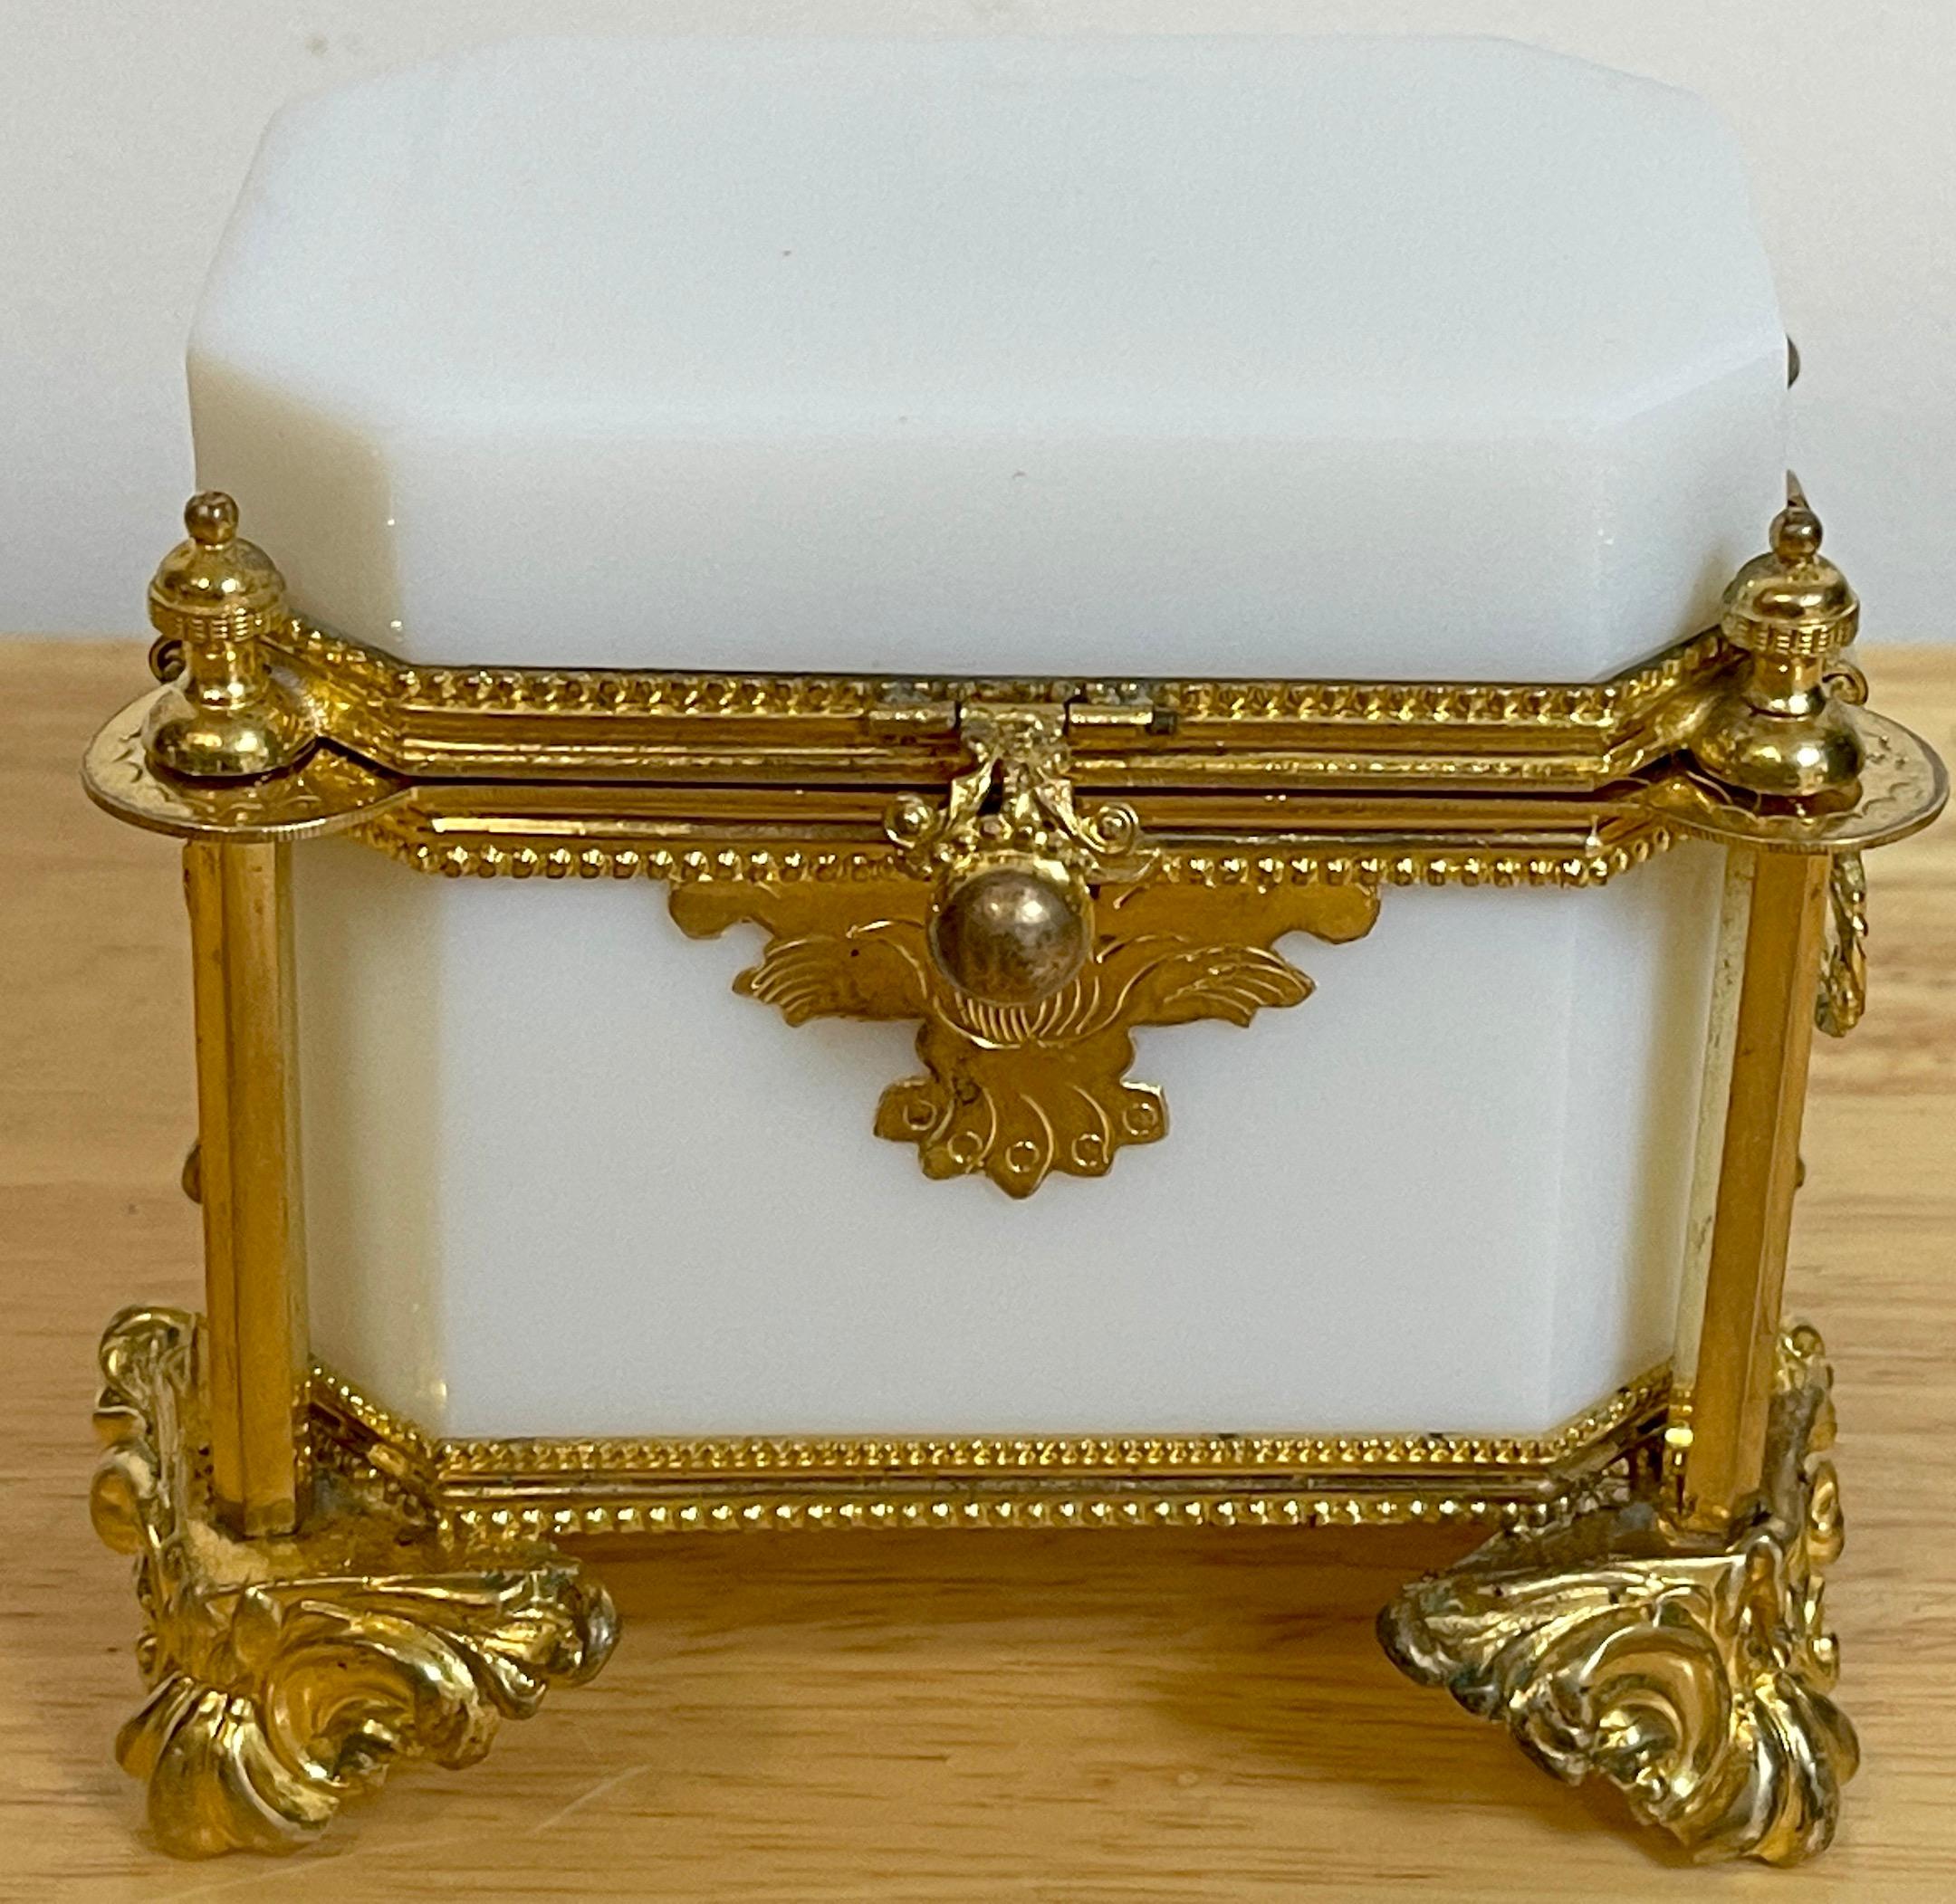 Exquisite French ormolu mounted white Opaline diminutive box, C 1865
Of beveled rectangular from with cross cut corners, flanked by four ormolu urn columns,raised on splay feet. with twin braided oval ring handles. When opened the the interior